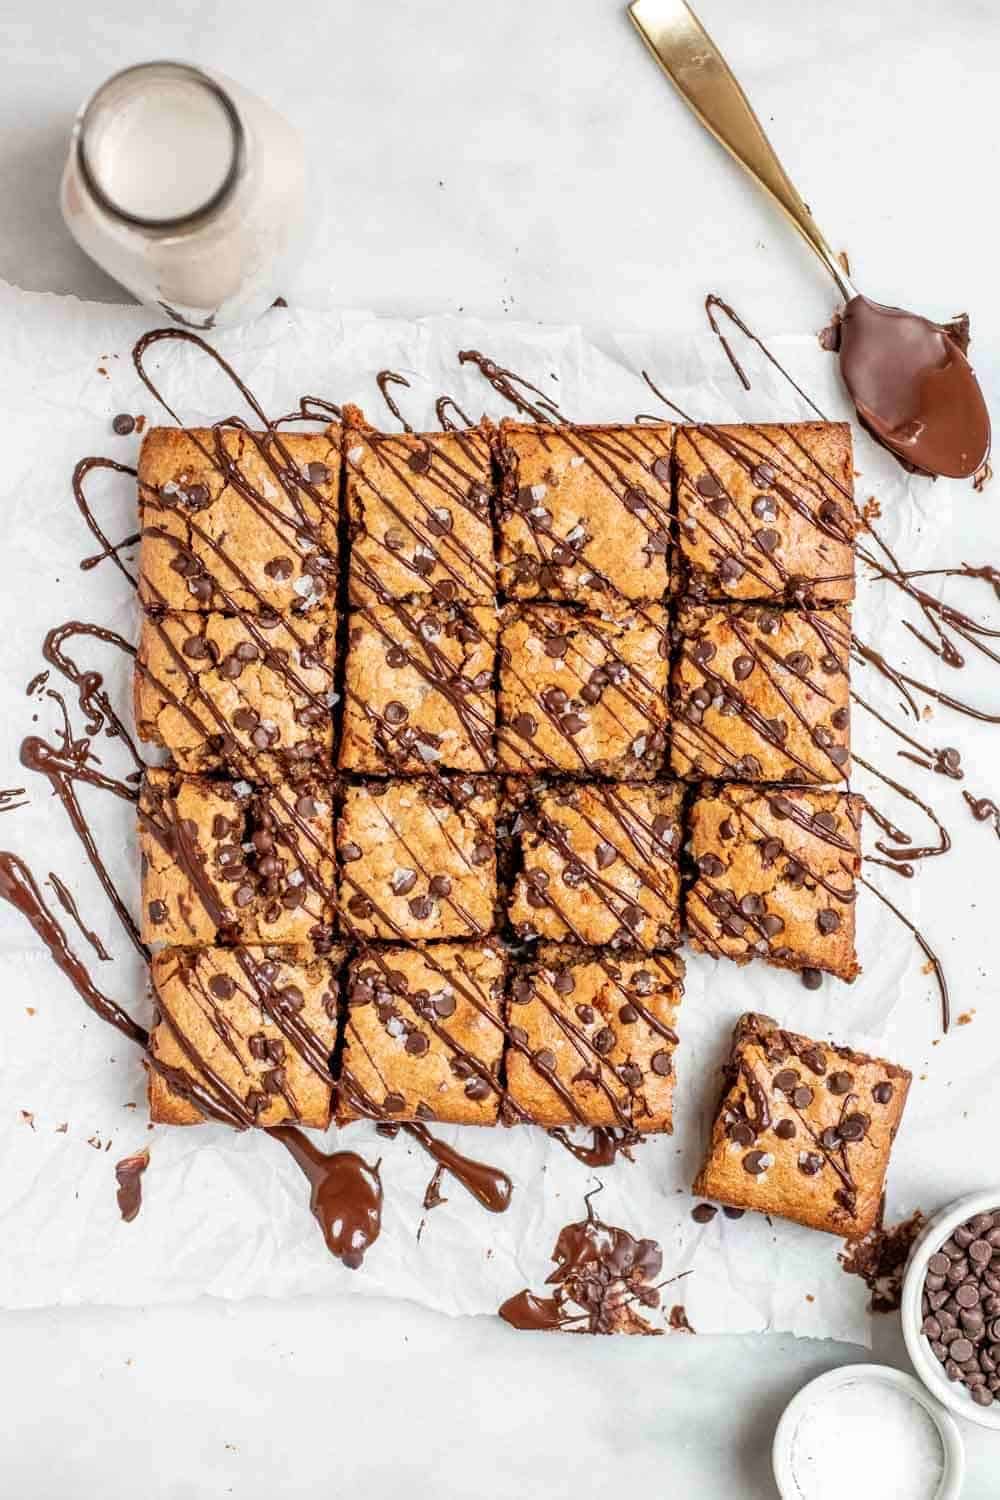 Gluten free blondies with chocolate drizzled on top.